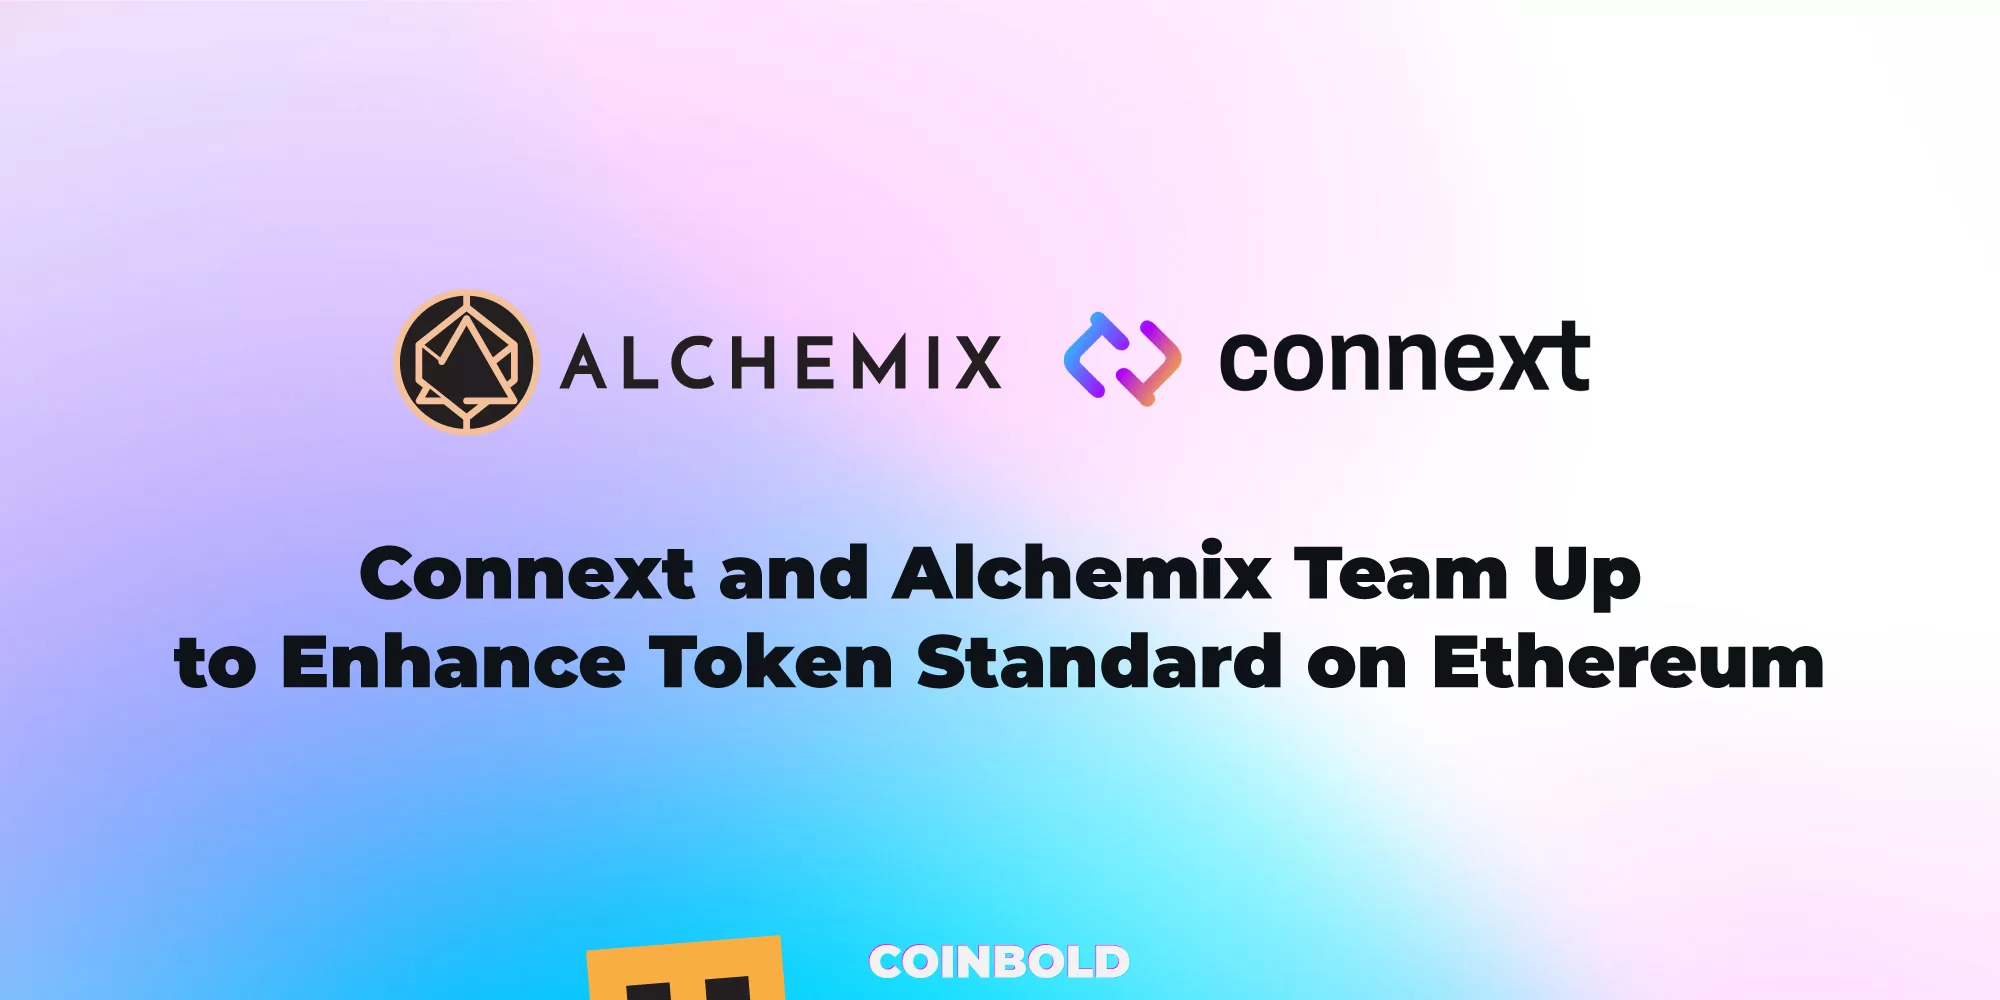 Connext and Alchemix Team Up to Enhance Token Standard on Ethereum